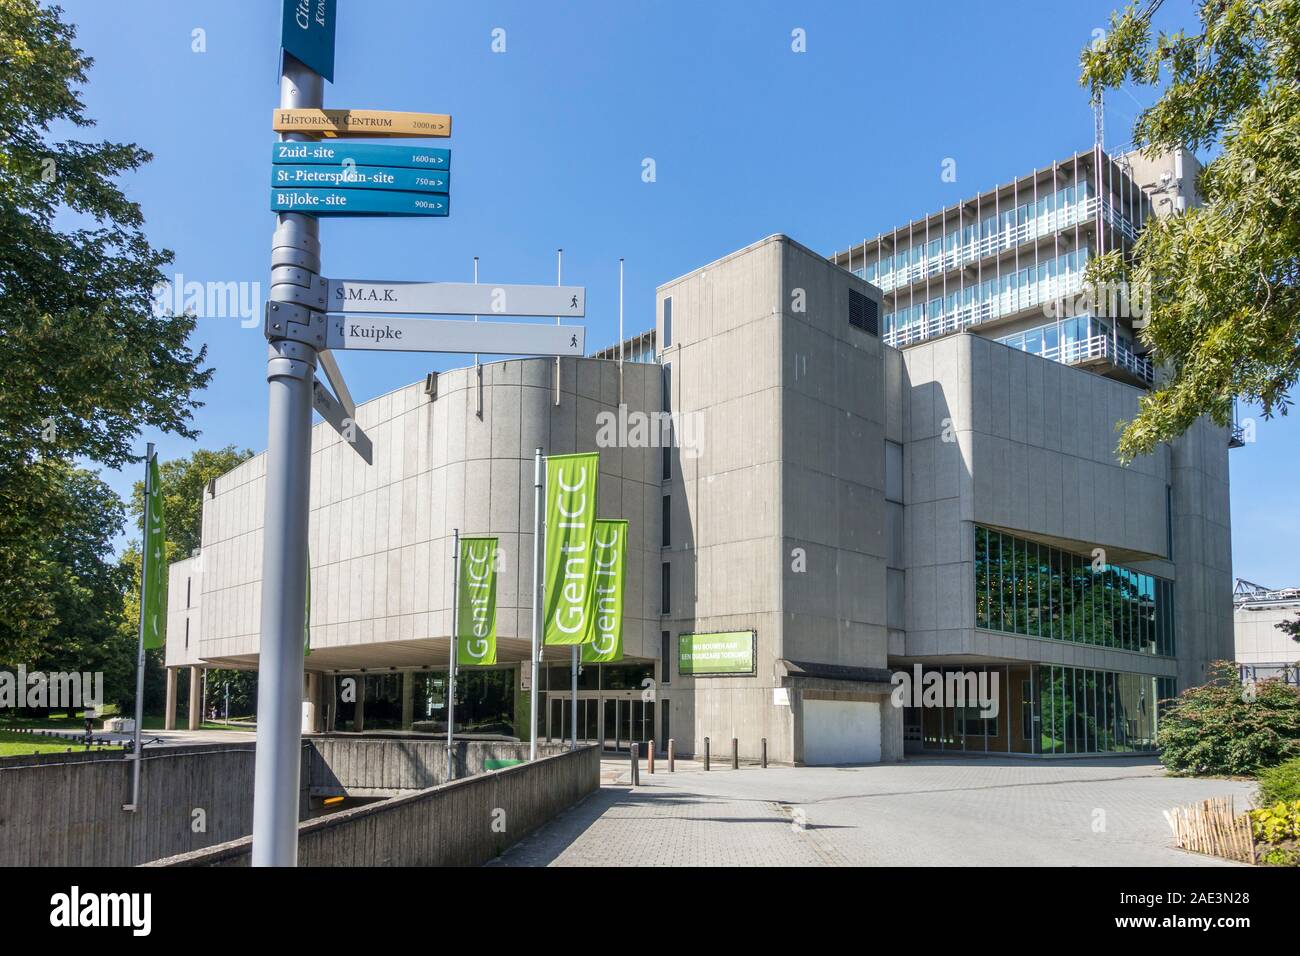 The ICC International Convention Center in the city Ghent / Gent, East Flanders, Belgium Stock Photo